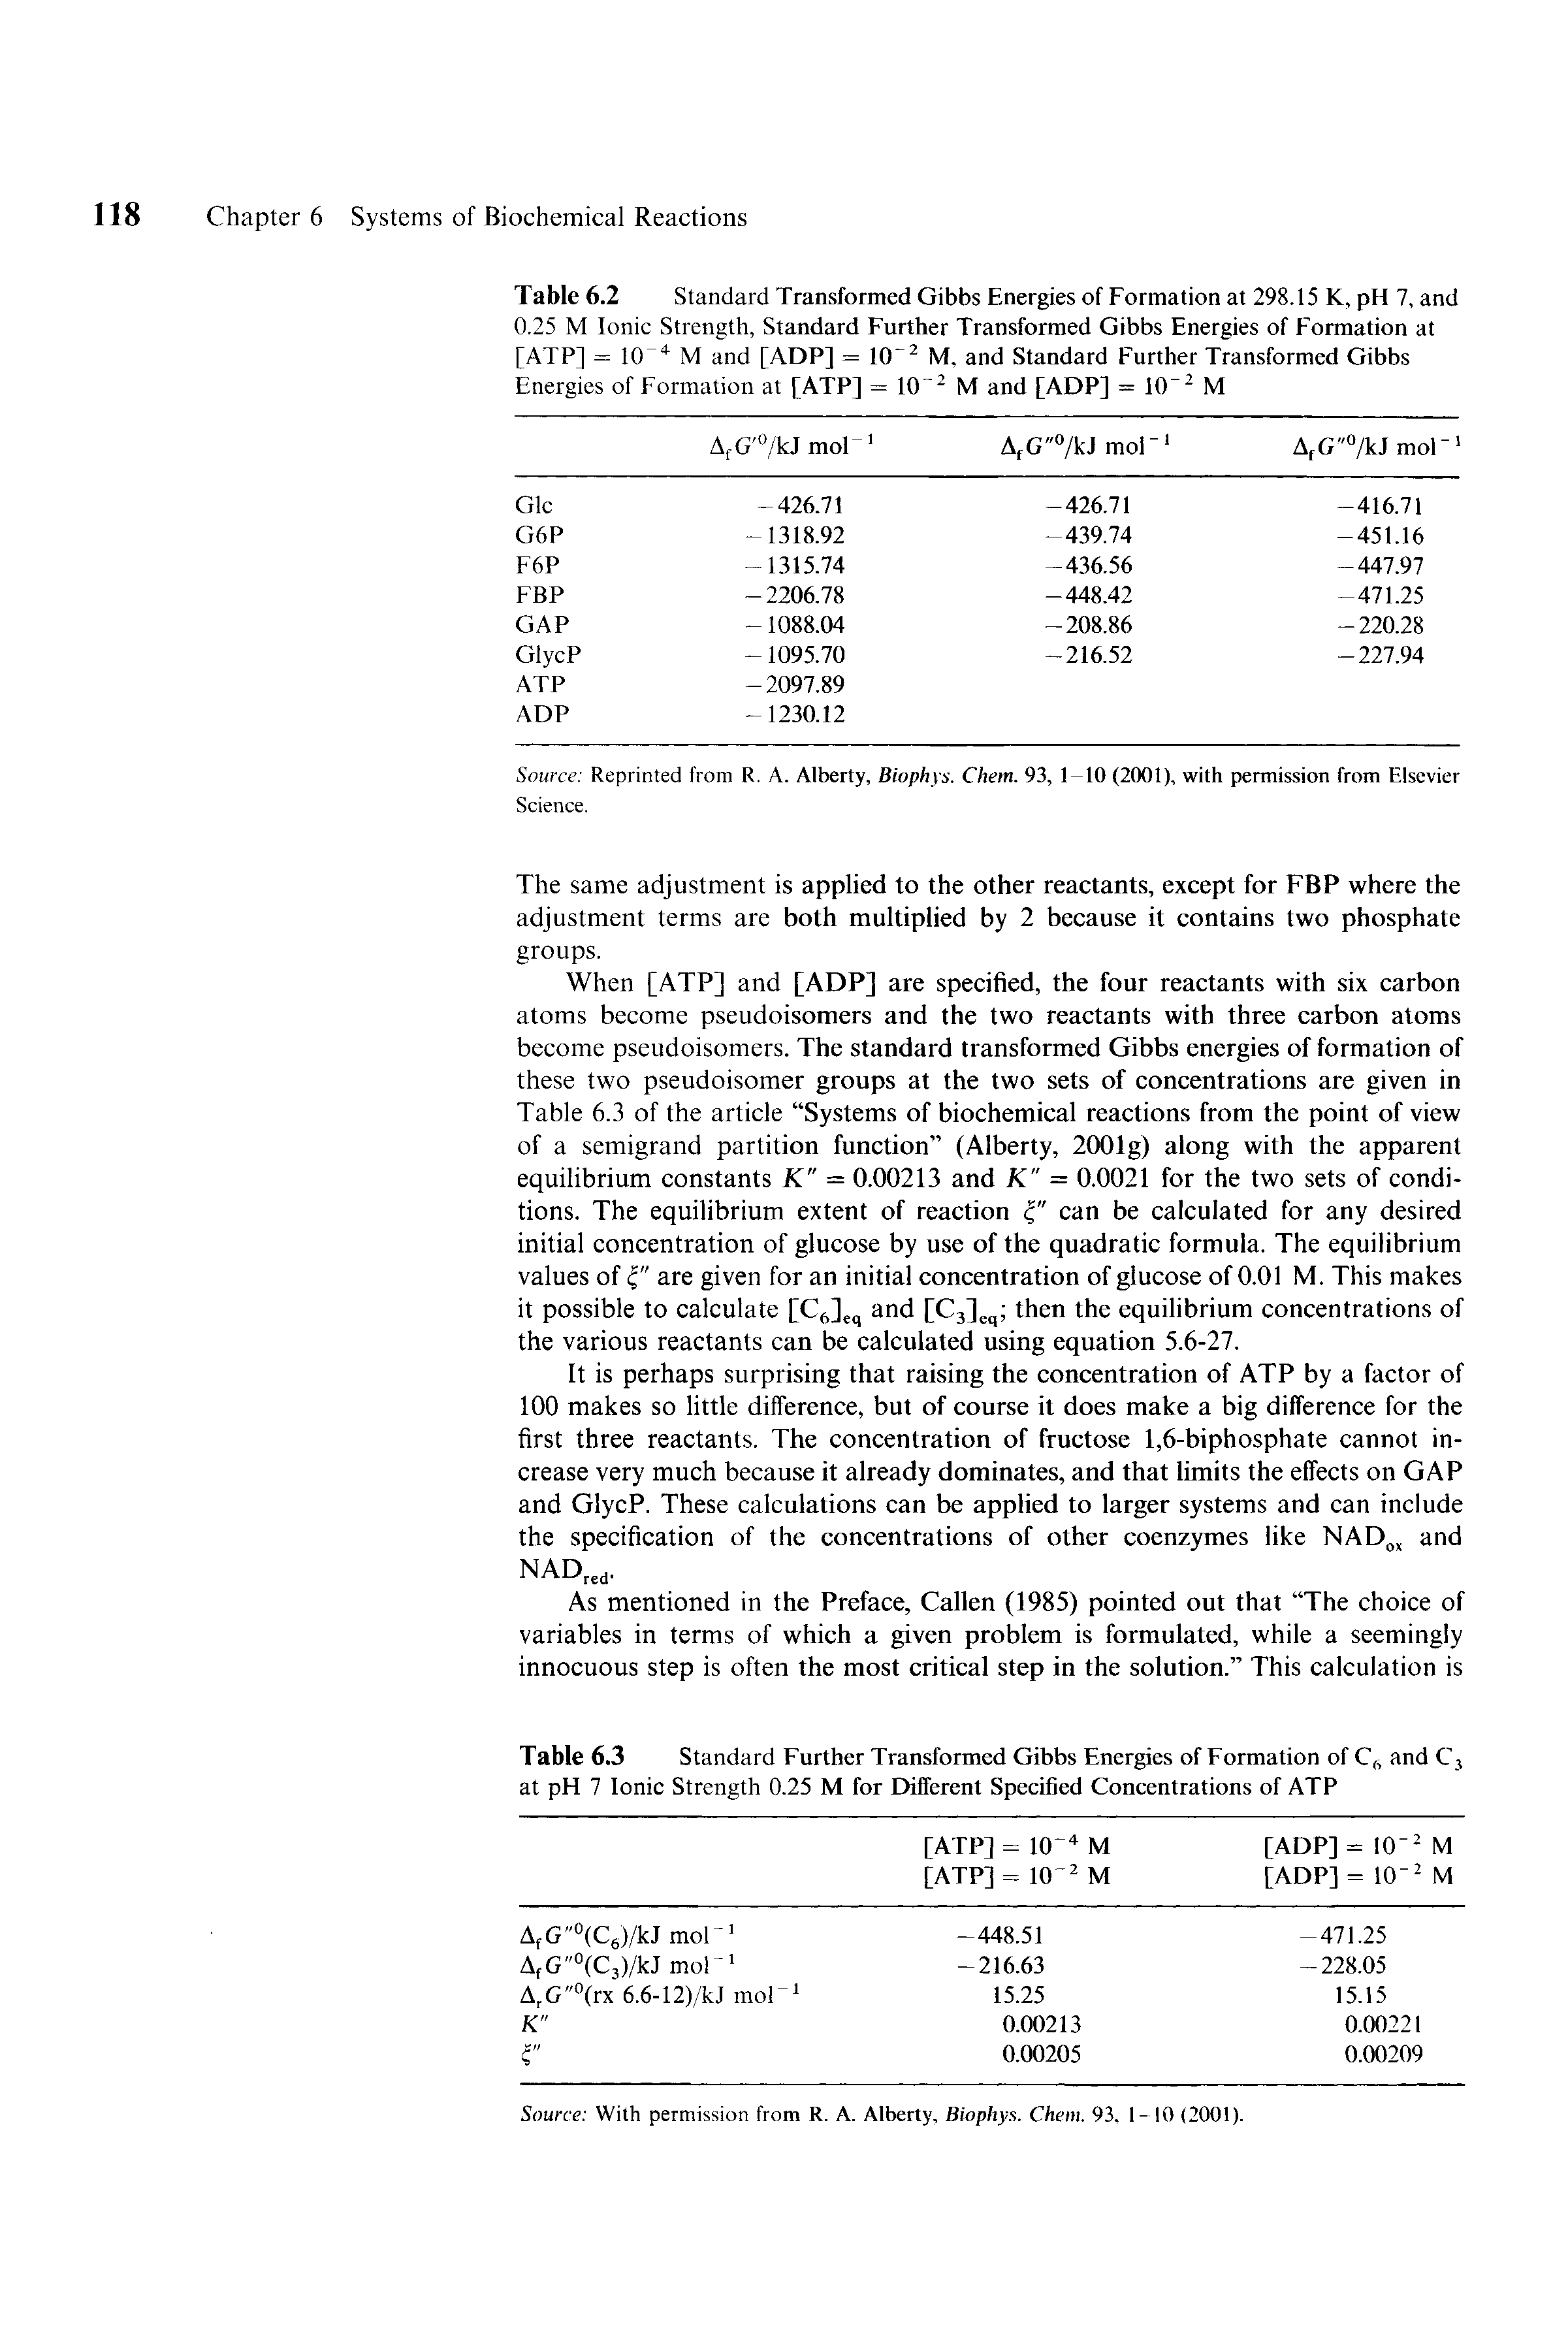 Table 6.2 Standard Transformed Gibbs Energies of Formation at 298.15 K, pH 7, and 0.25 M Ionic Strength, Standard Further Transformed Gibbs Energies of Formation at [ATP] = 10 4 M and [ADP] = 10 2 M, and Standard Further Transformed Gibbs Energies of Formation at [ATP] = 10 2 M and [ADP] = 10-2 M...